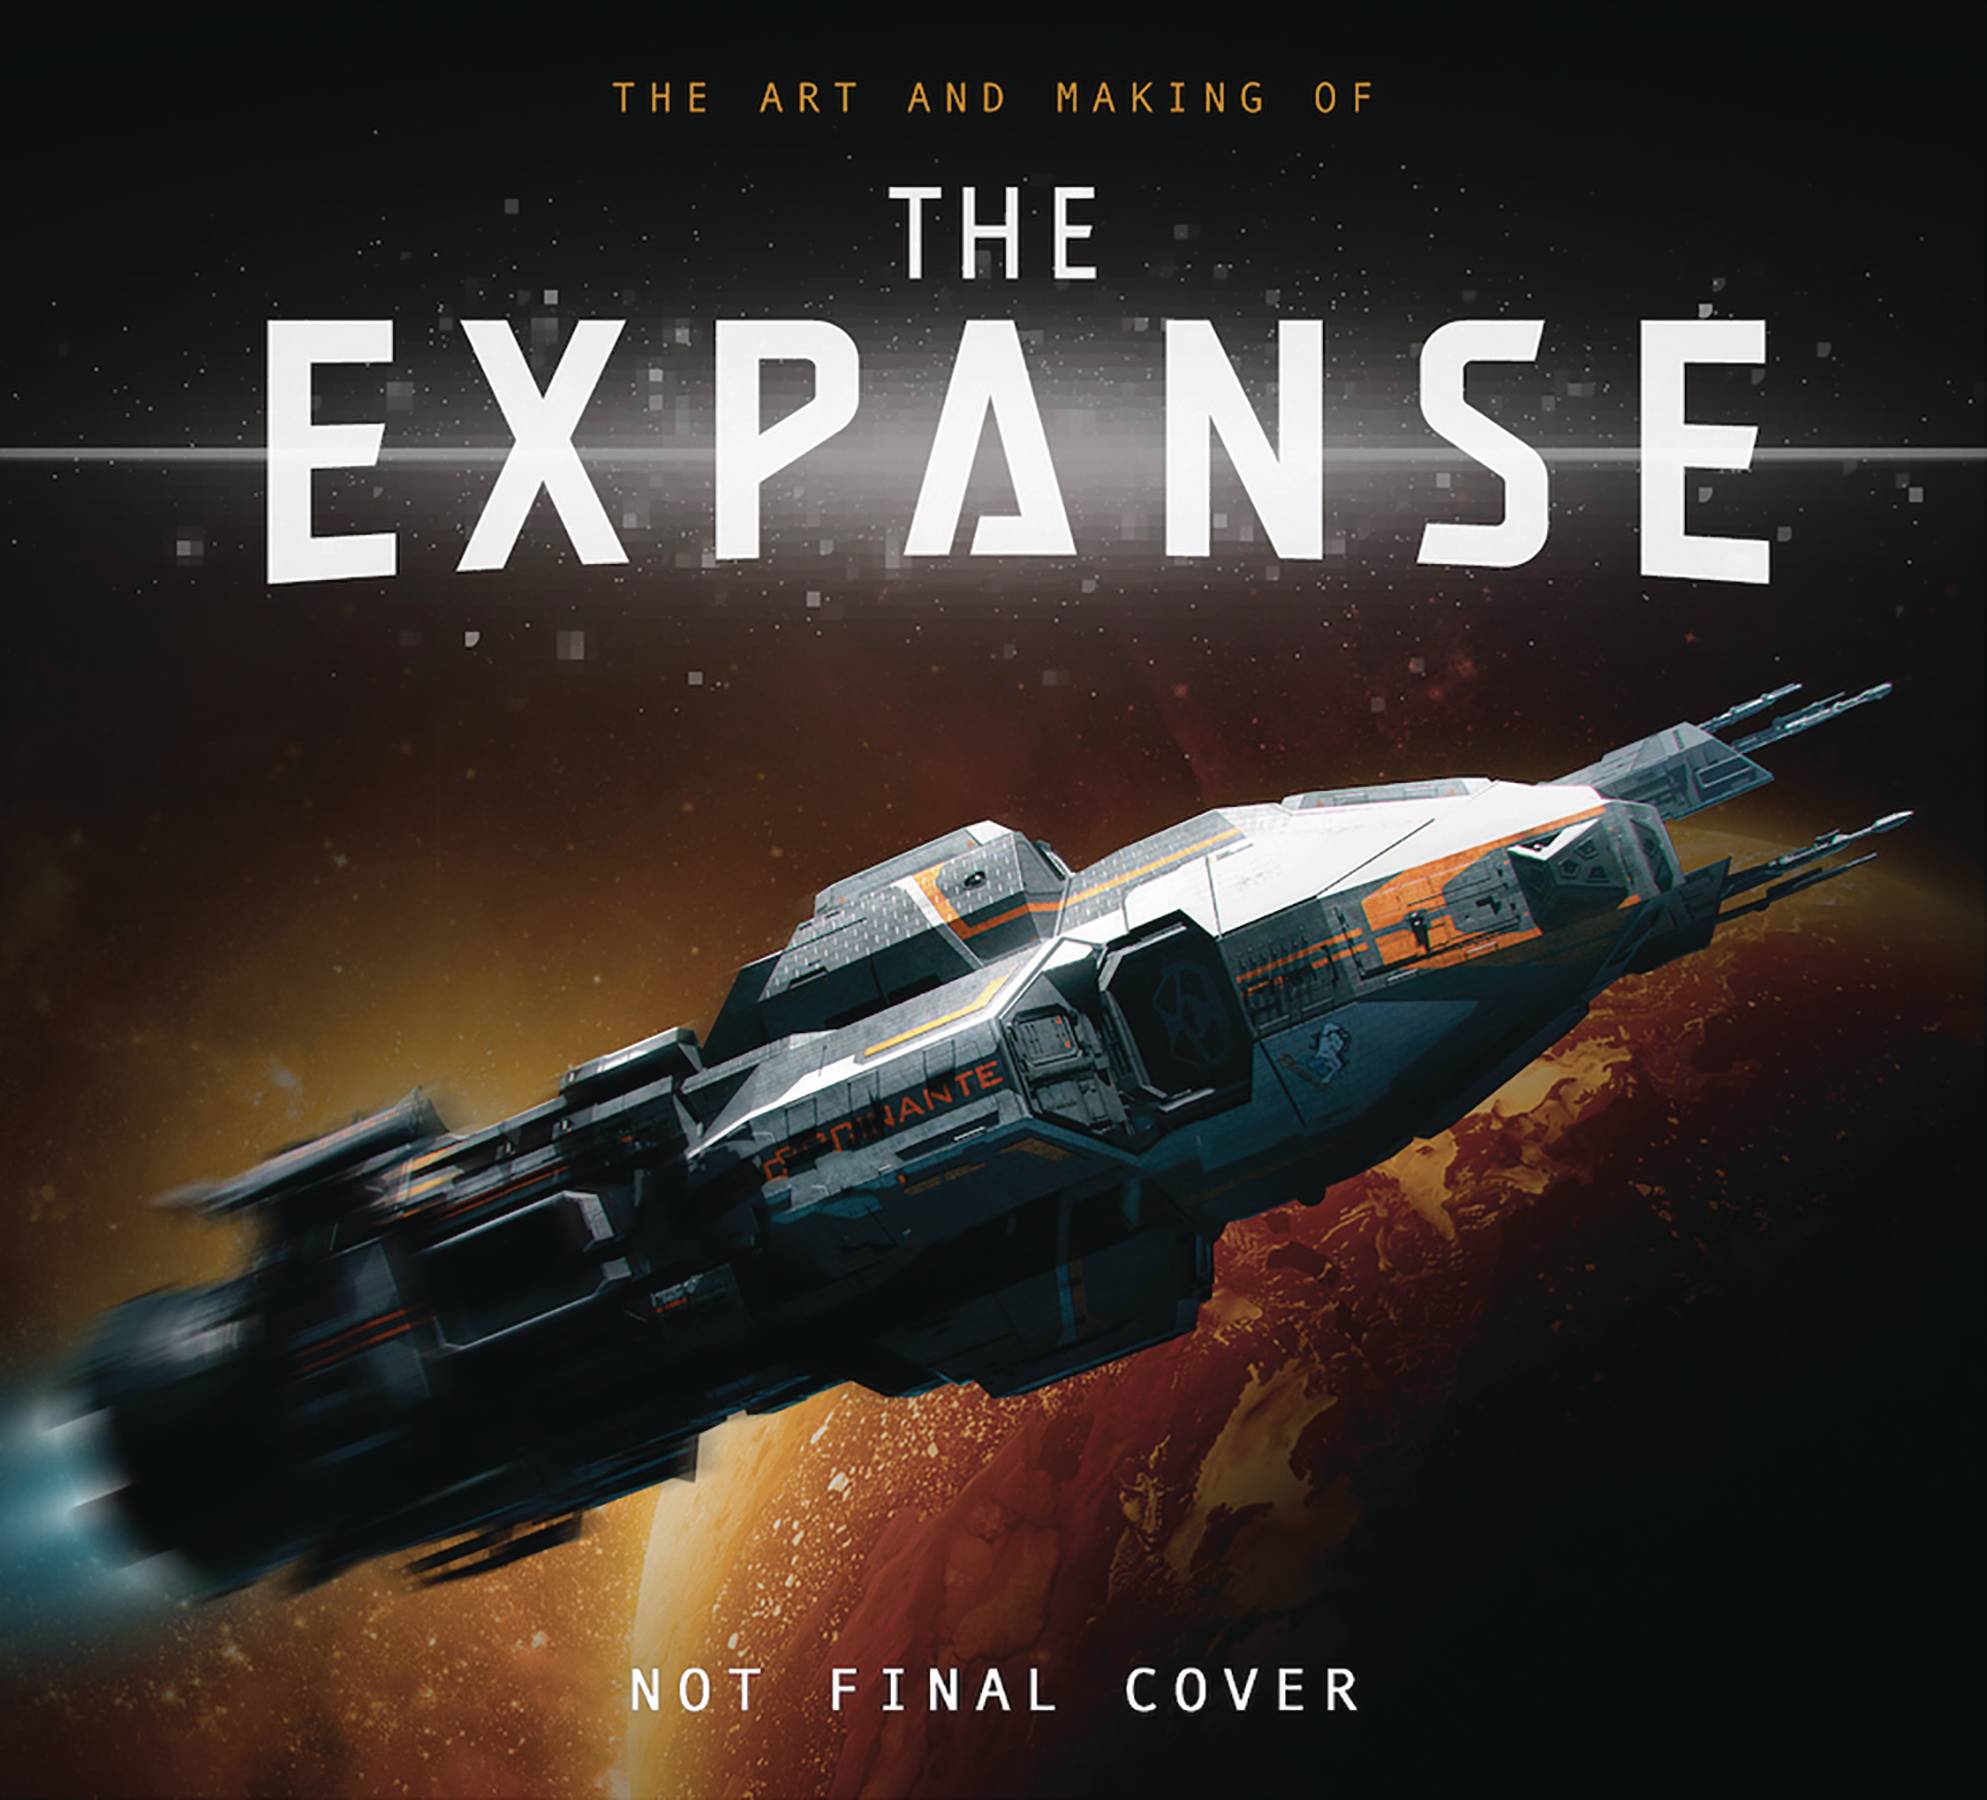 Art And Making of the Expanse Hardcover